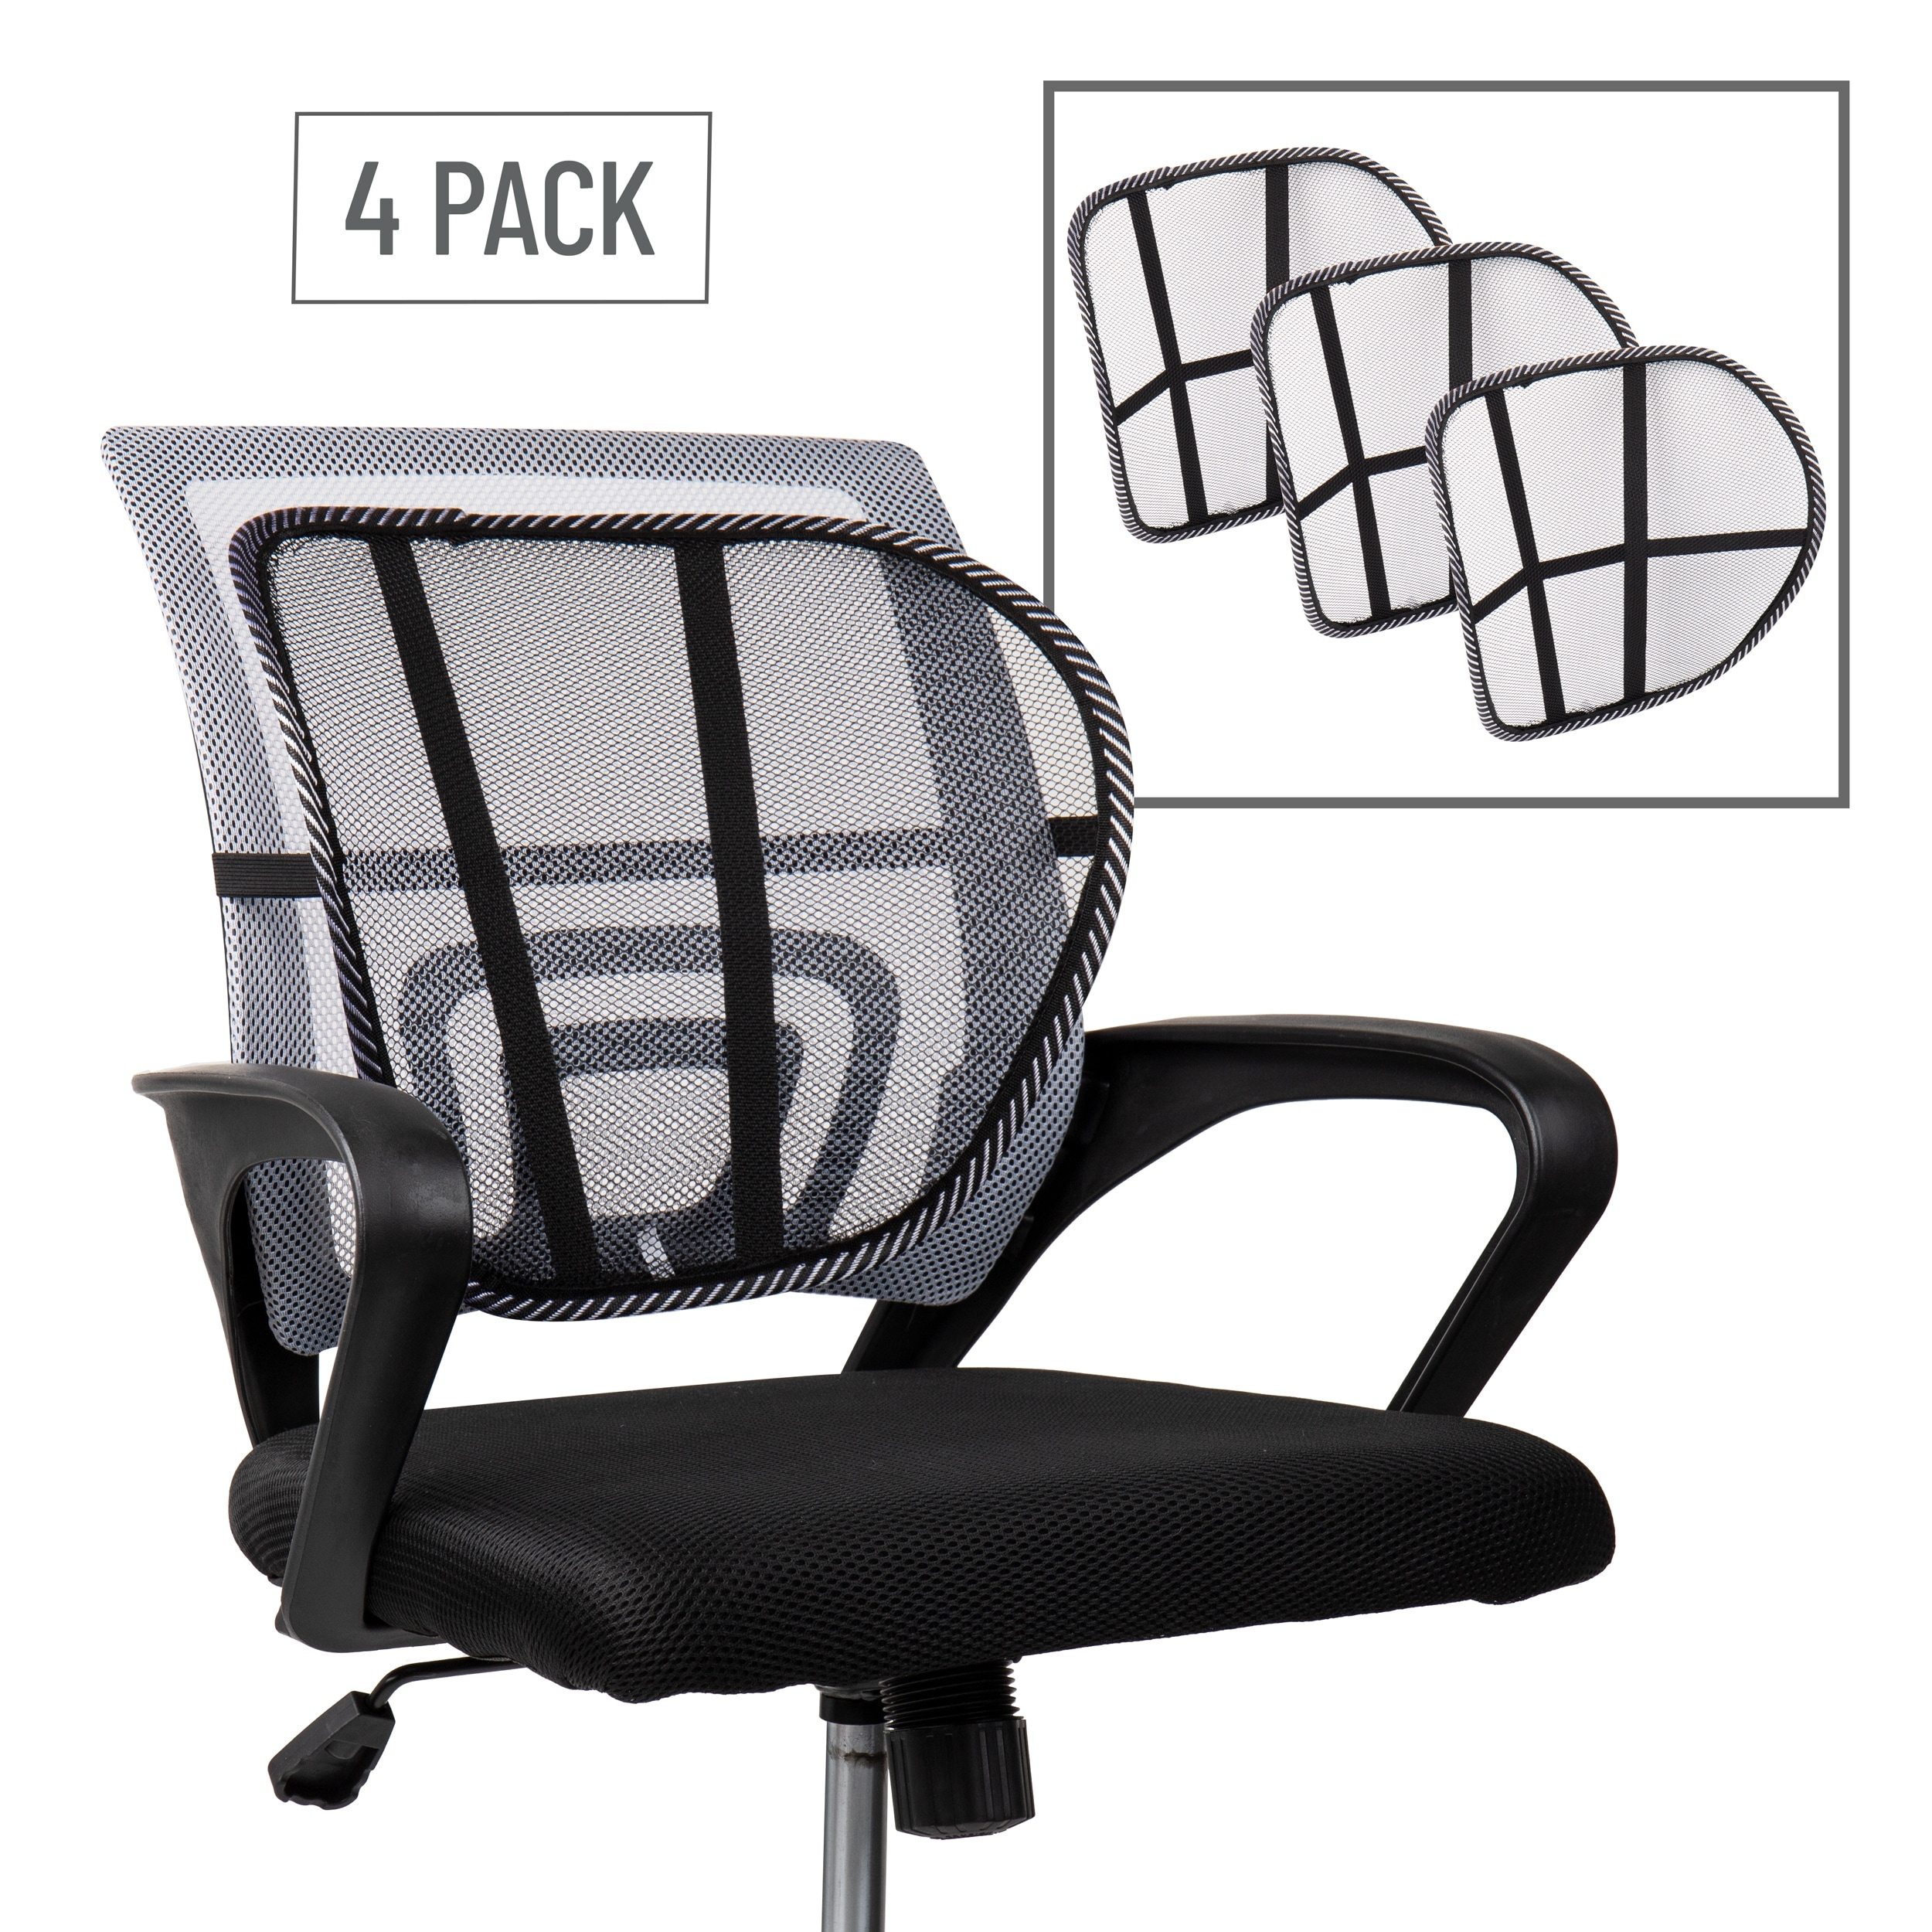 https://ak1.ostkcdn.com/images/products/is/images/direct/dc939ab7bfa56dbdf010b46c592c27edd6e5246f/Mind-Reader-Harmony-Collection%2C-Ergonomic-Lower-Back-Support%2C-Attaches-to-Office-Chair%2C-Set-of-4.jpg